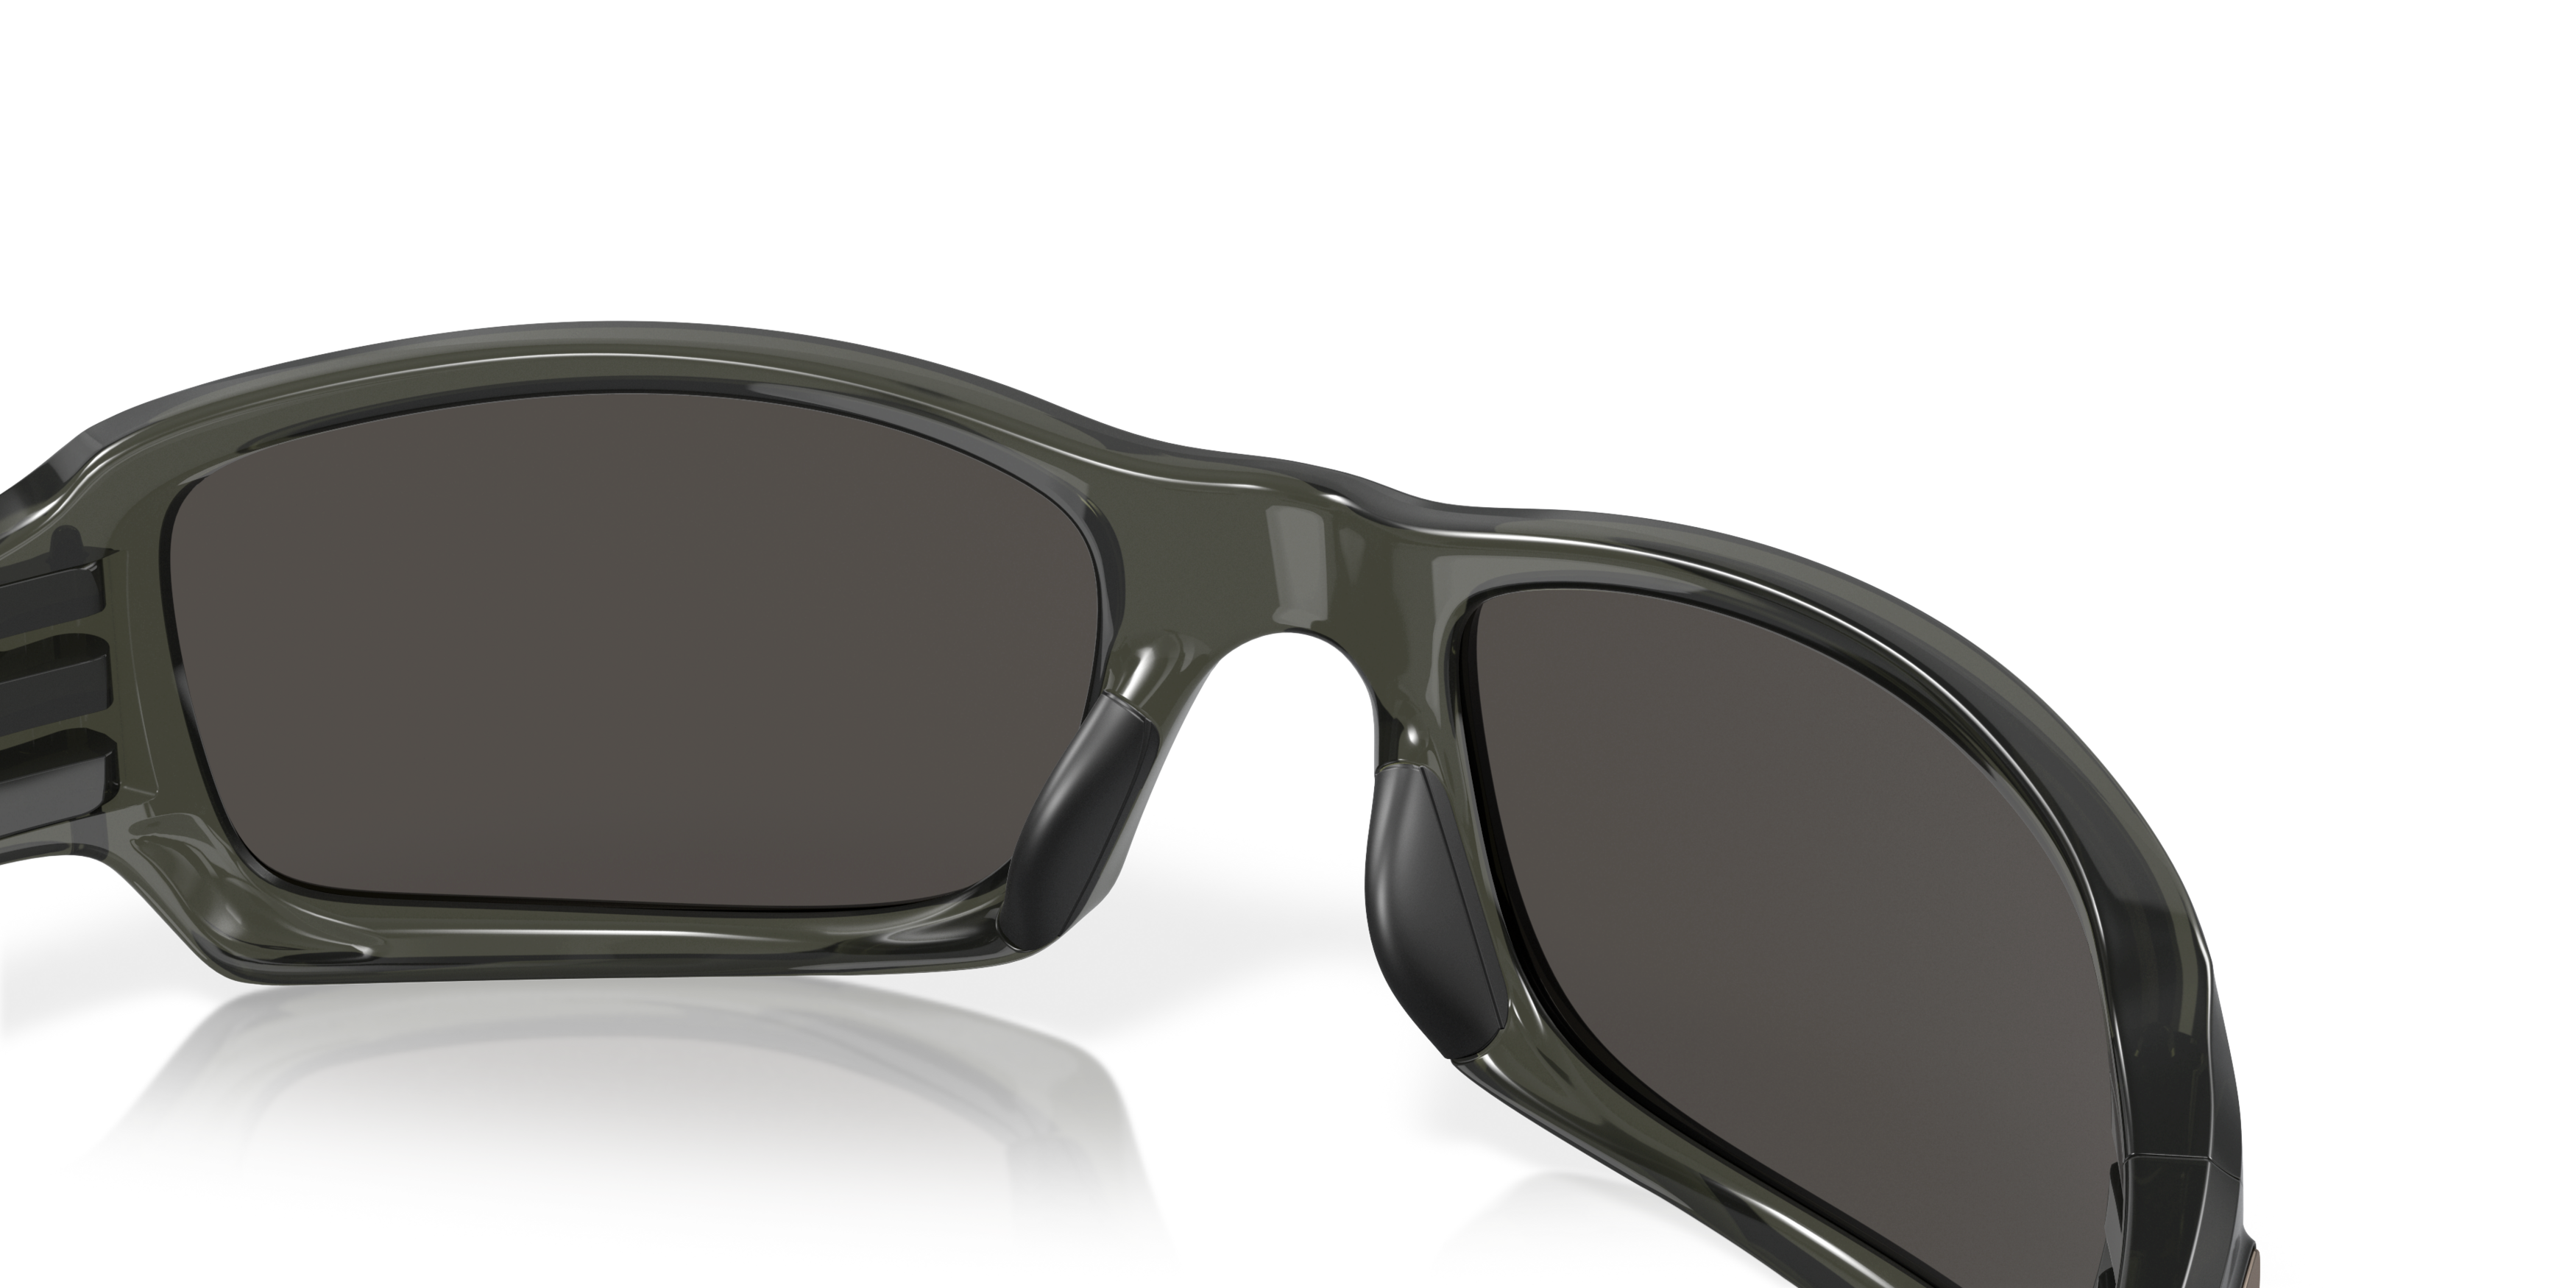 [products.image.detail03] OAKLEY FIVES SQUARED OO9238 923805